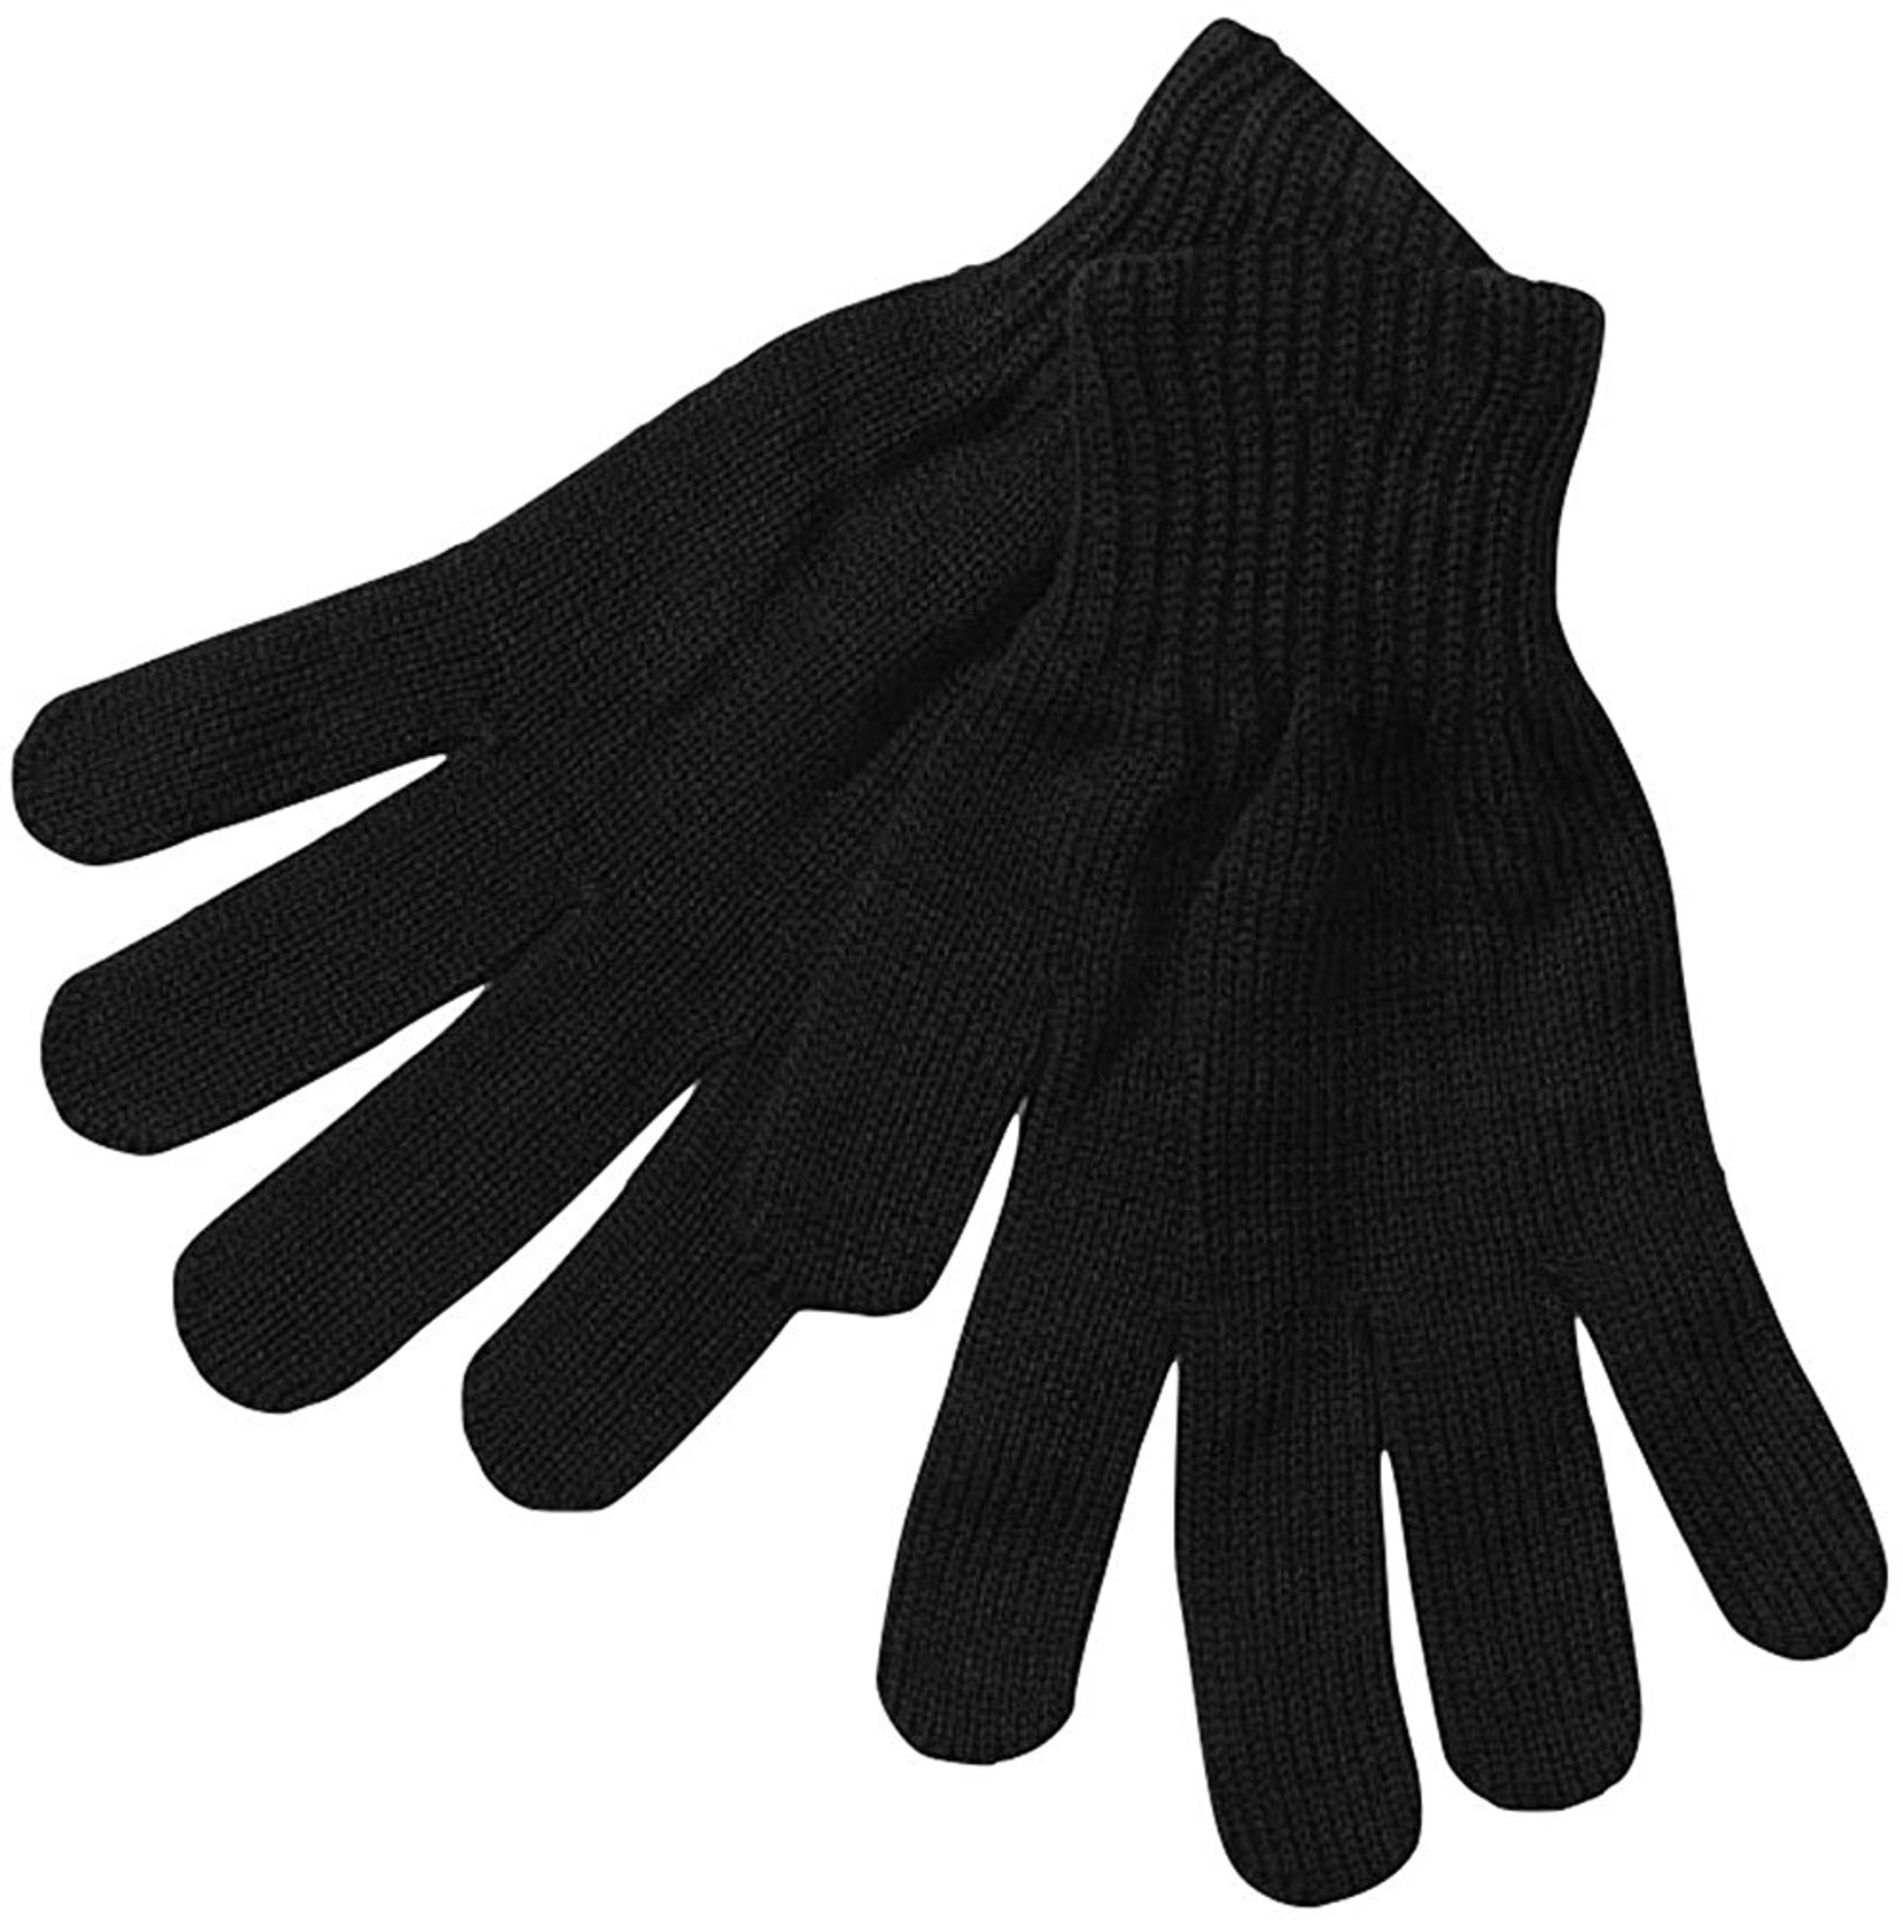 V Brand New Job Lot of Twelve Mens Black Thermal Lined Winter Gloves X 2 YOUR BID PRICE TO BE